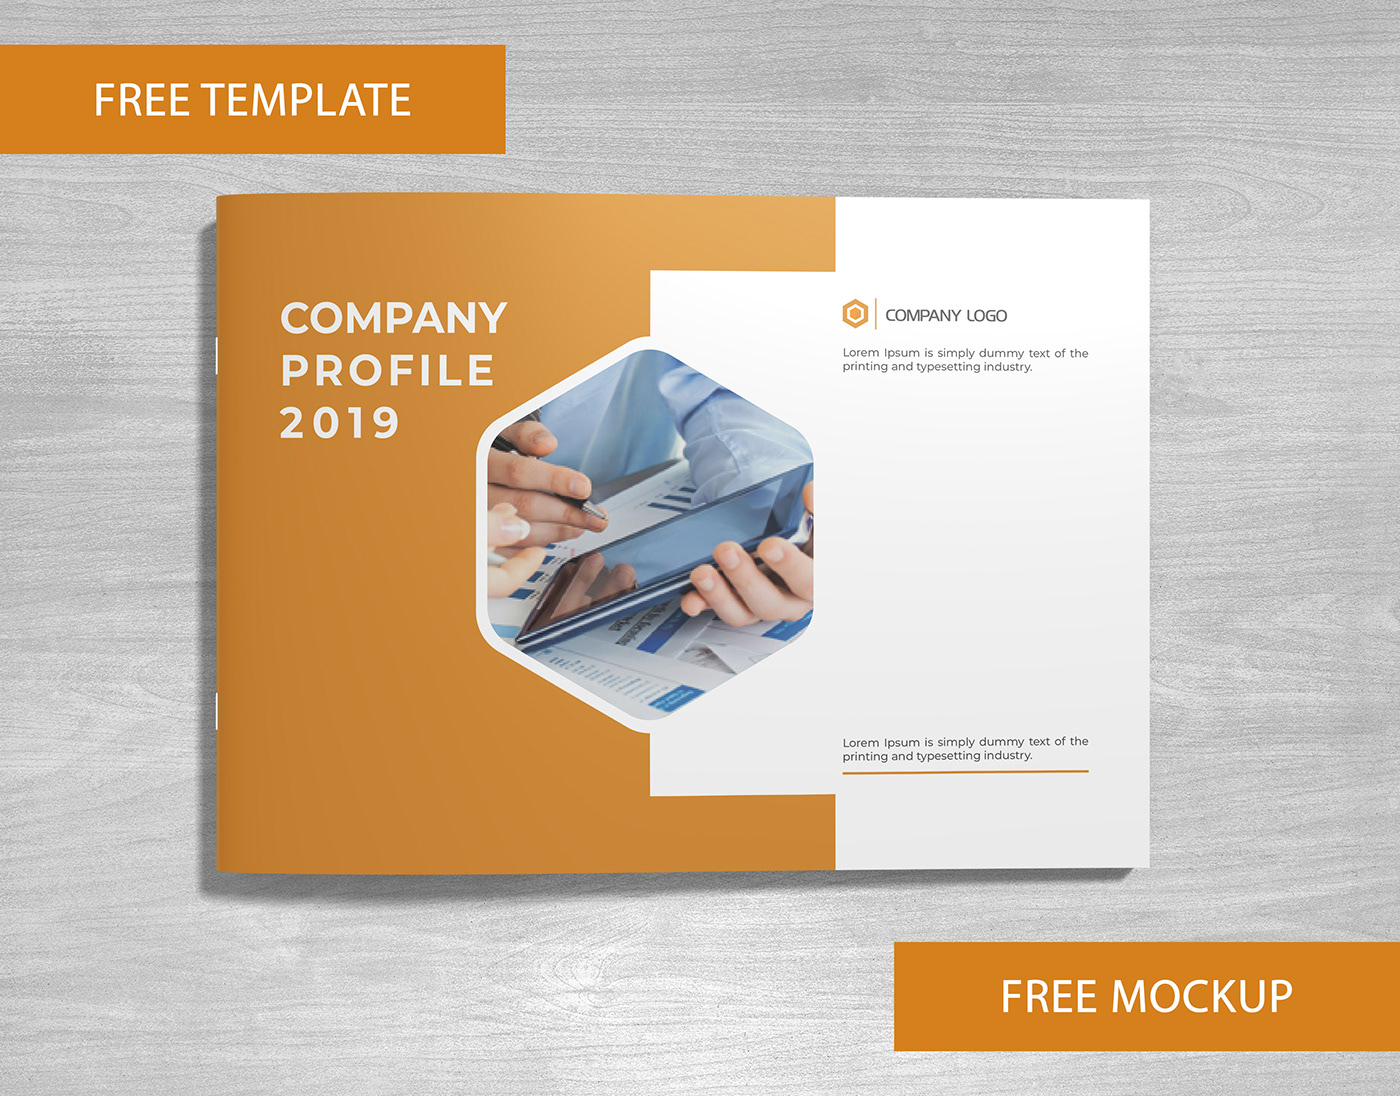 Company Profile Free Template And Mockup Download On Behance Regarding Illustrator Brochure Templates Free Download